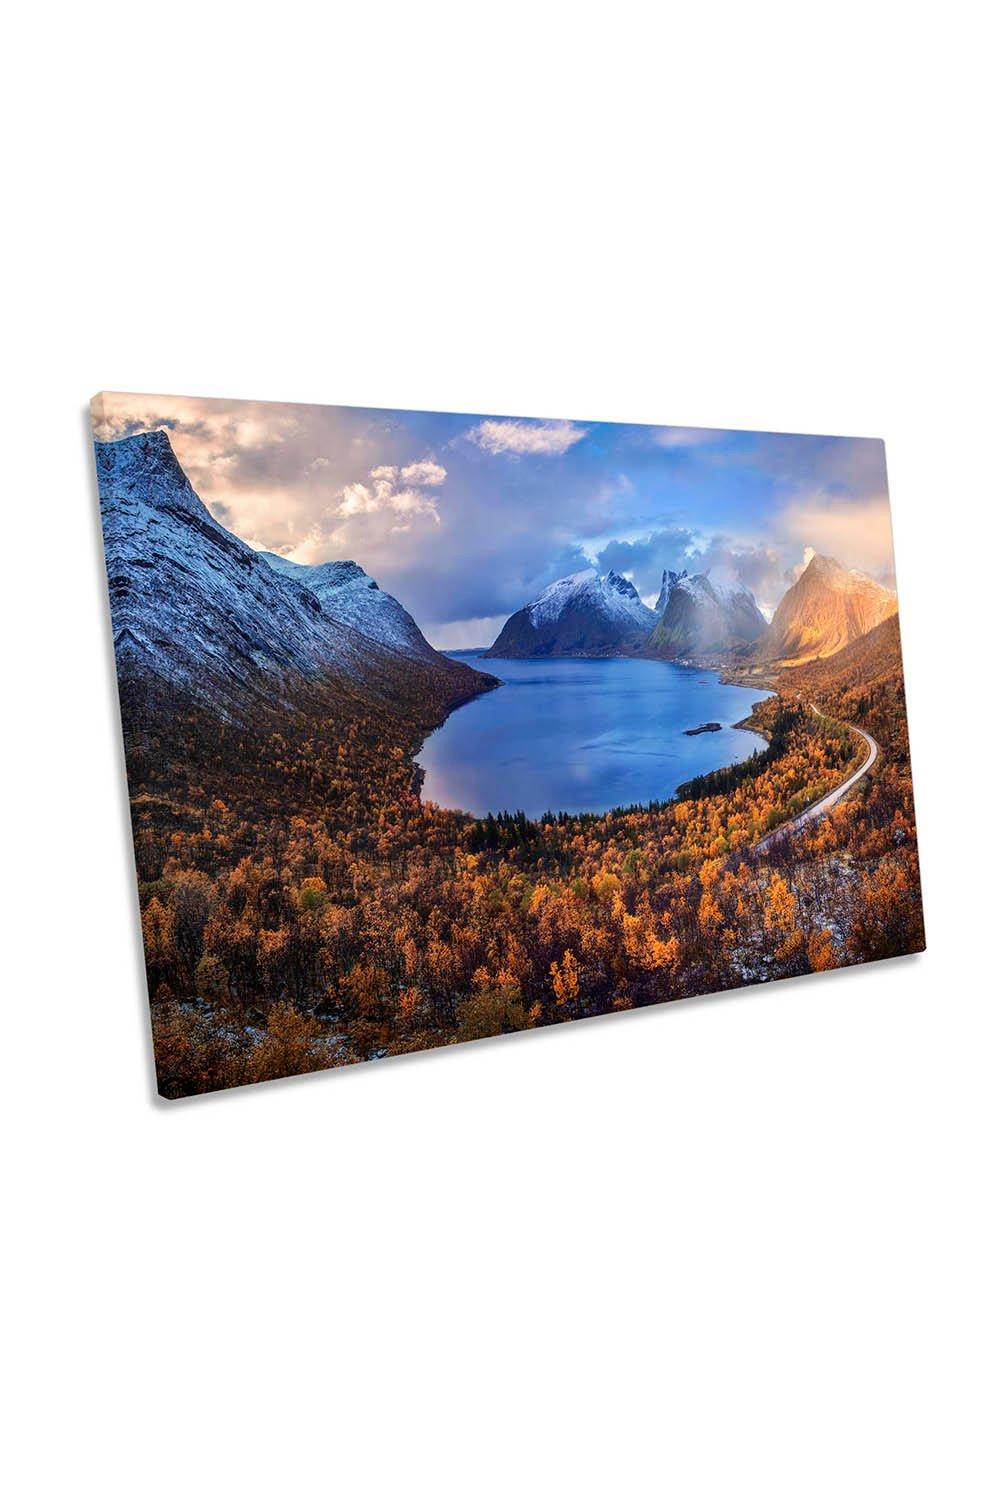 Autumn in Senja Norway Mountains Landscape Canvas Wall Art Picture Print